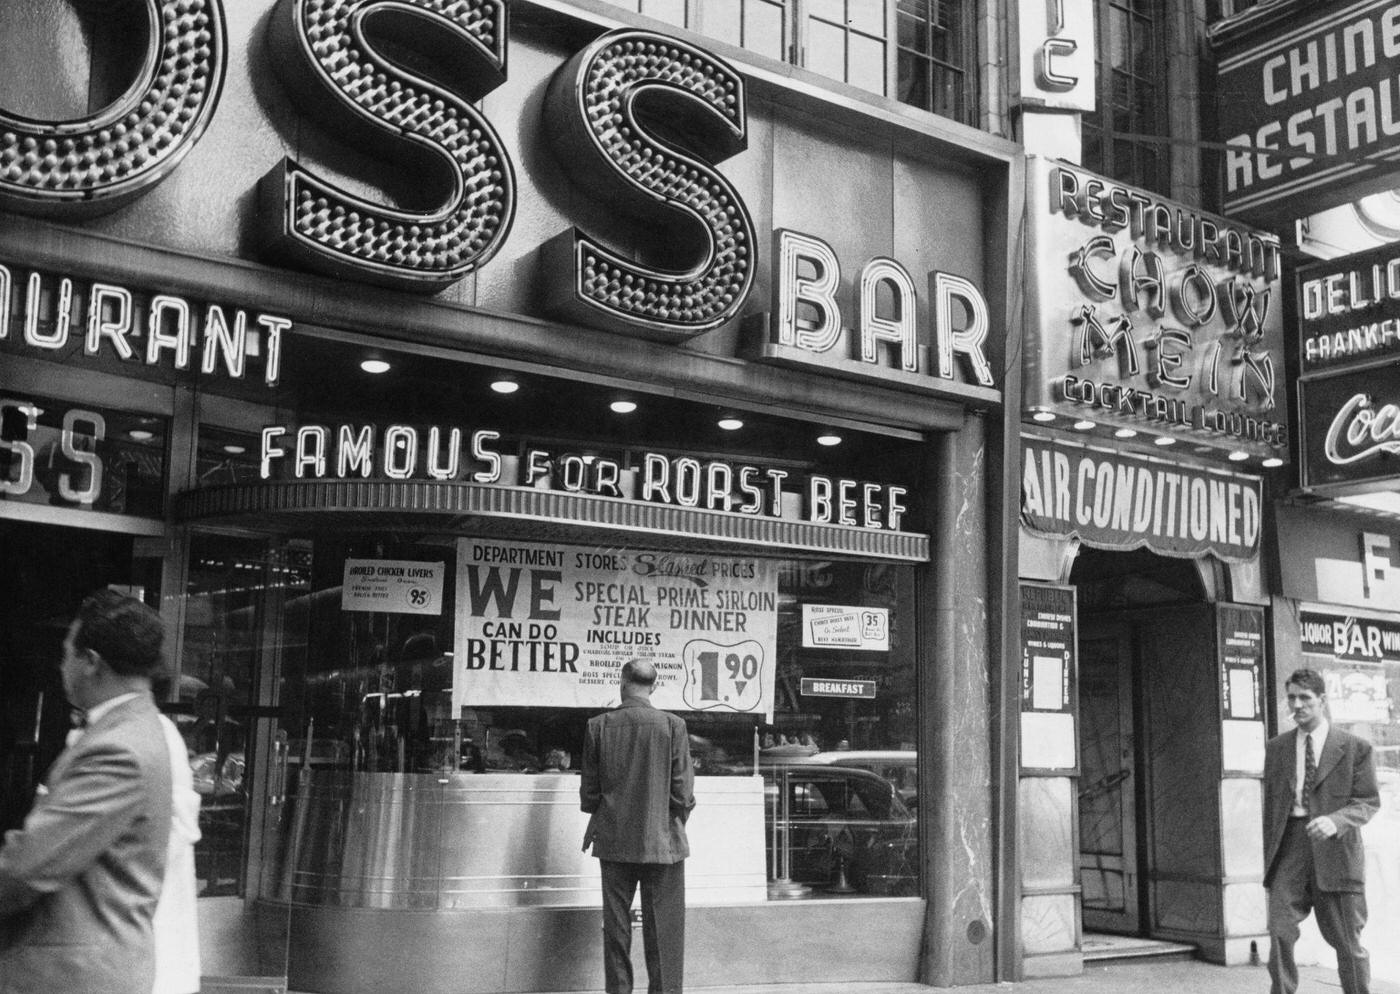 Price War In New York City: Ross Restaurant Displaying Signs Announcing The &Amp;Quot;Price War&Amp;Quot; And Sales On Broadway, Manhattan, 1951.